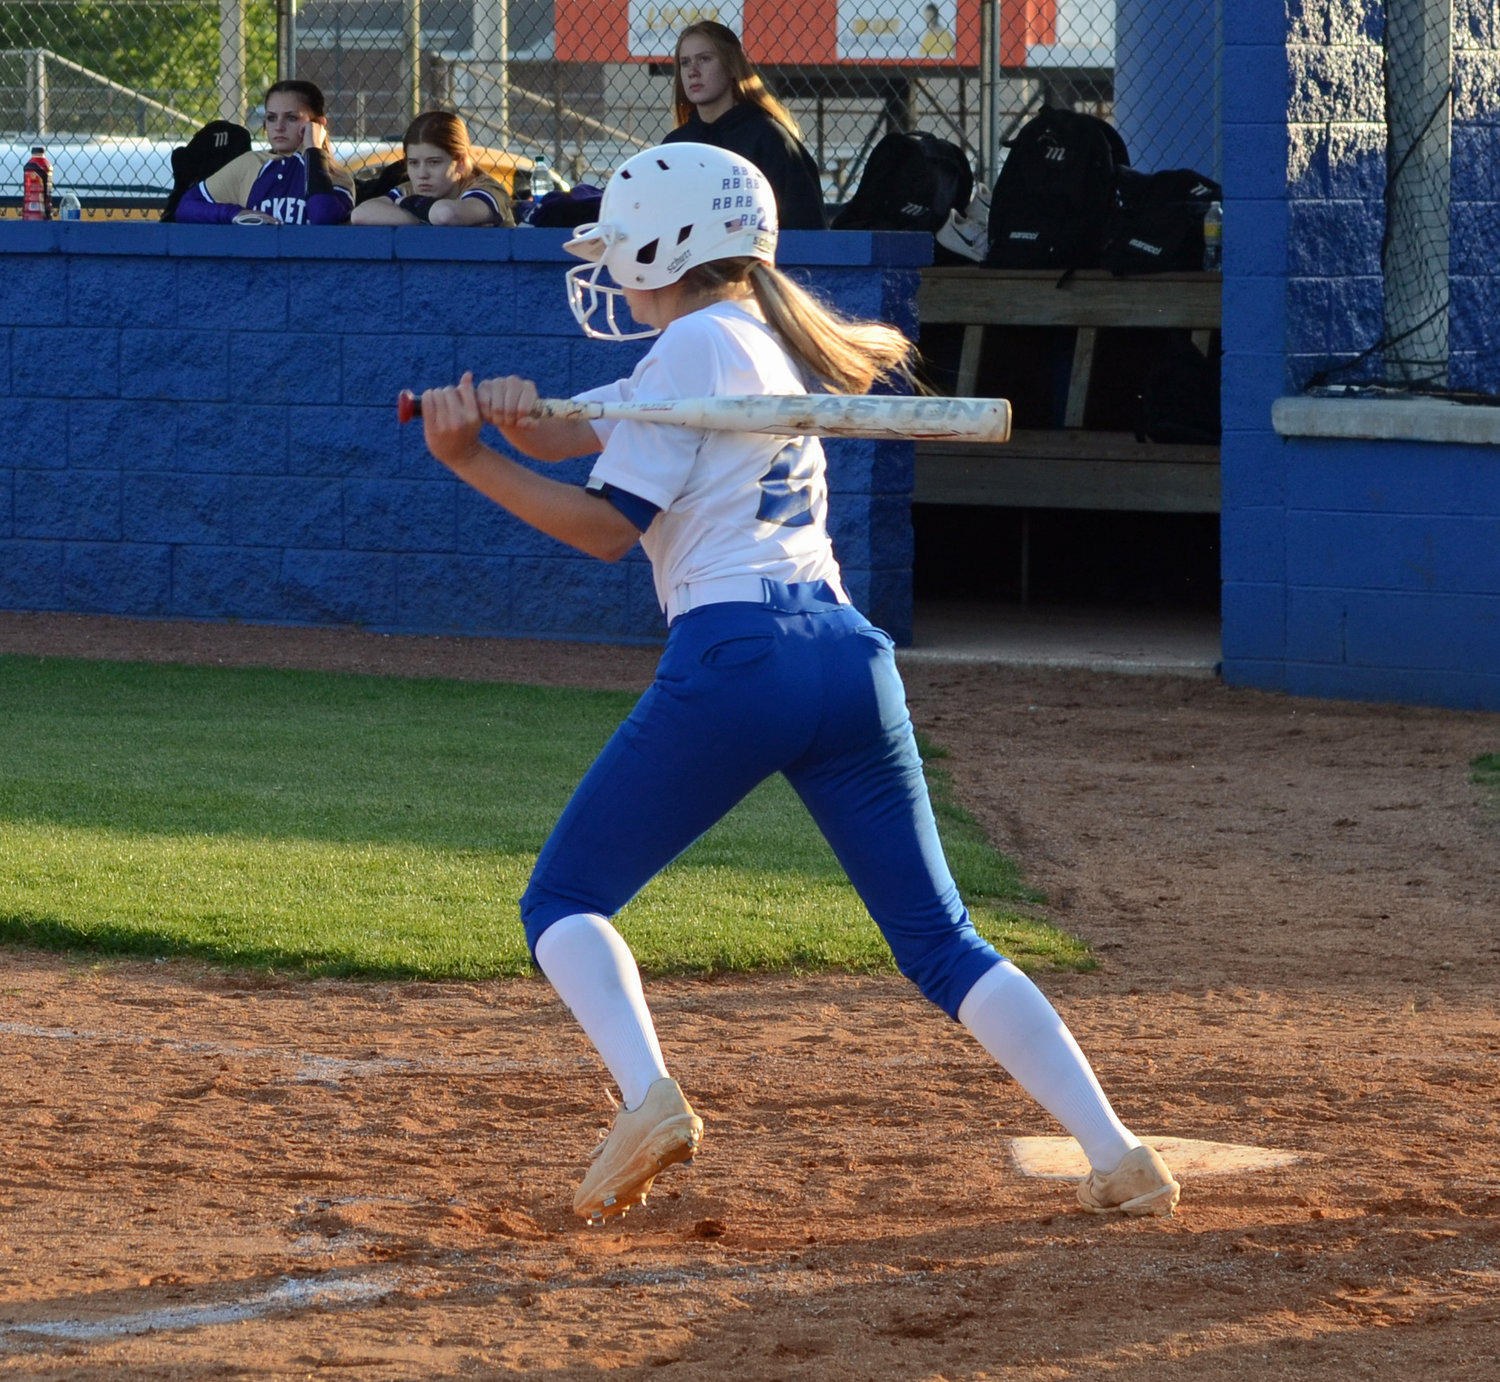 Megan Dunn comes up with an RBI double in the bottom of the fourth inning.